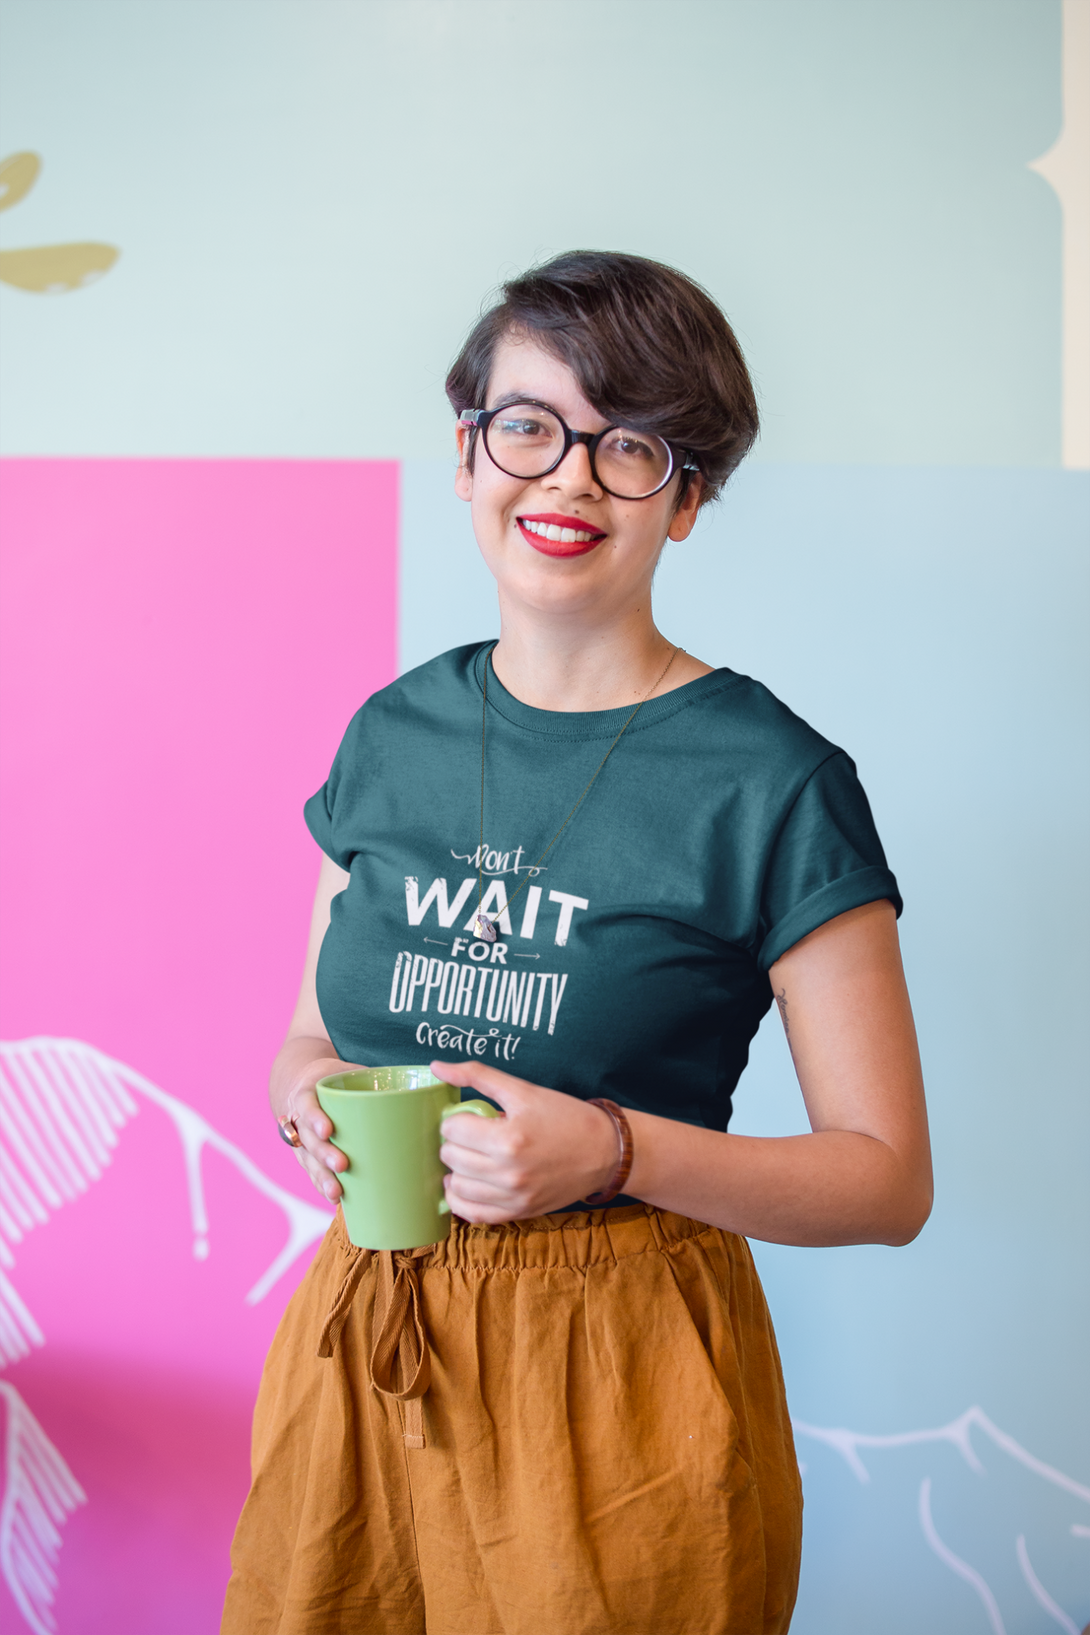 Create Opportunity Printed T-Shirt For Women - WowWaves - 6